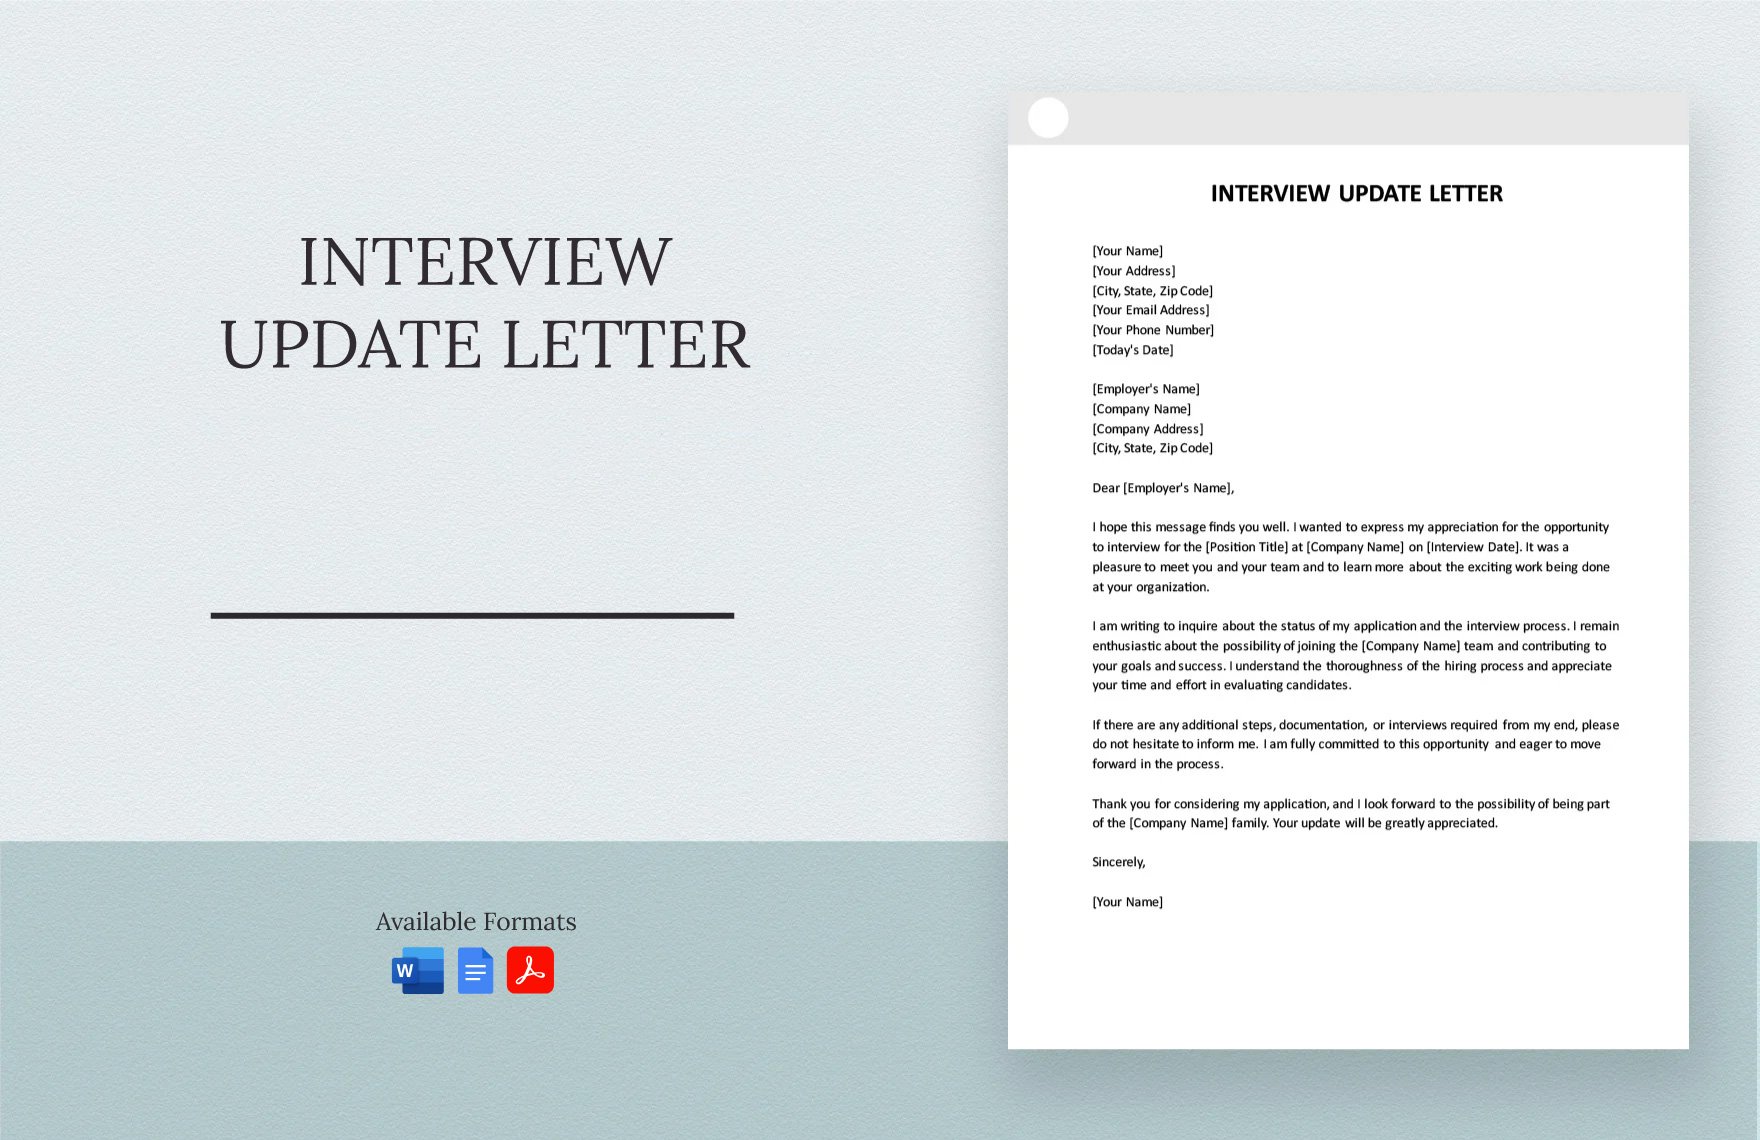 Interview Update Letter